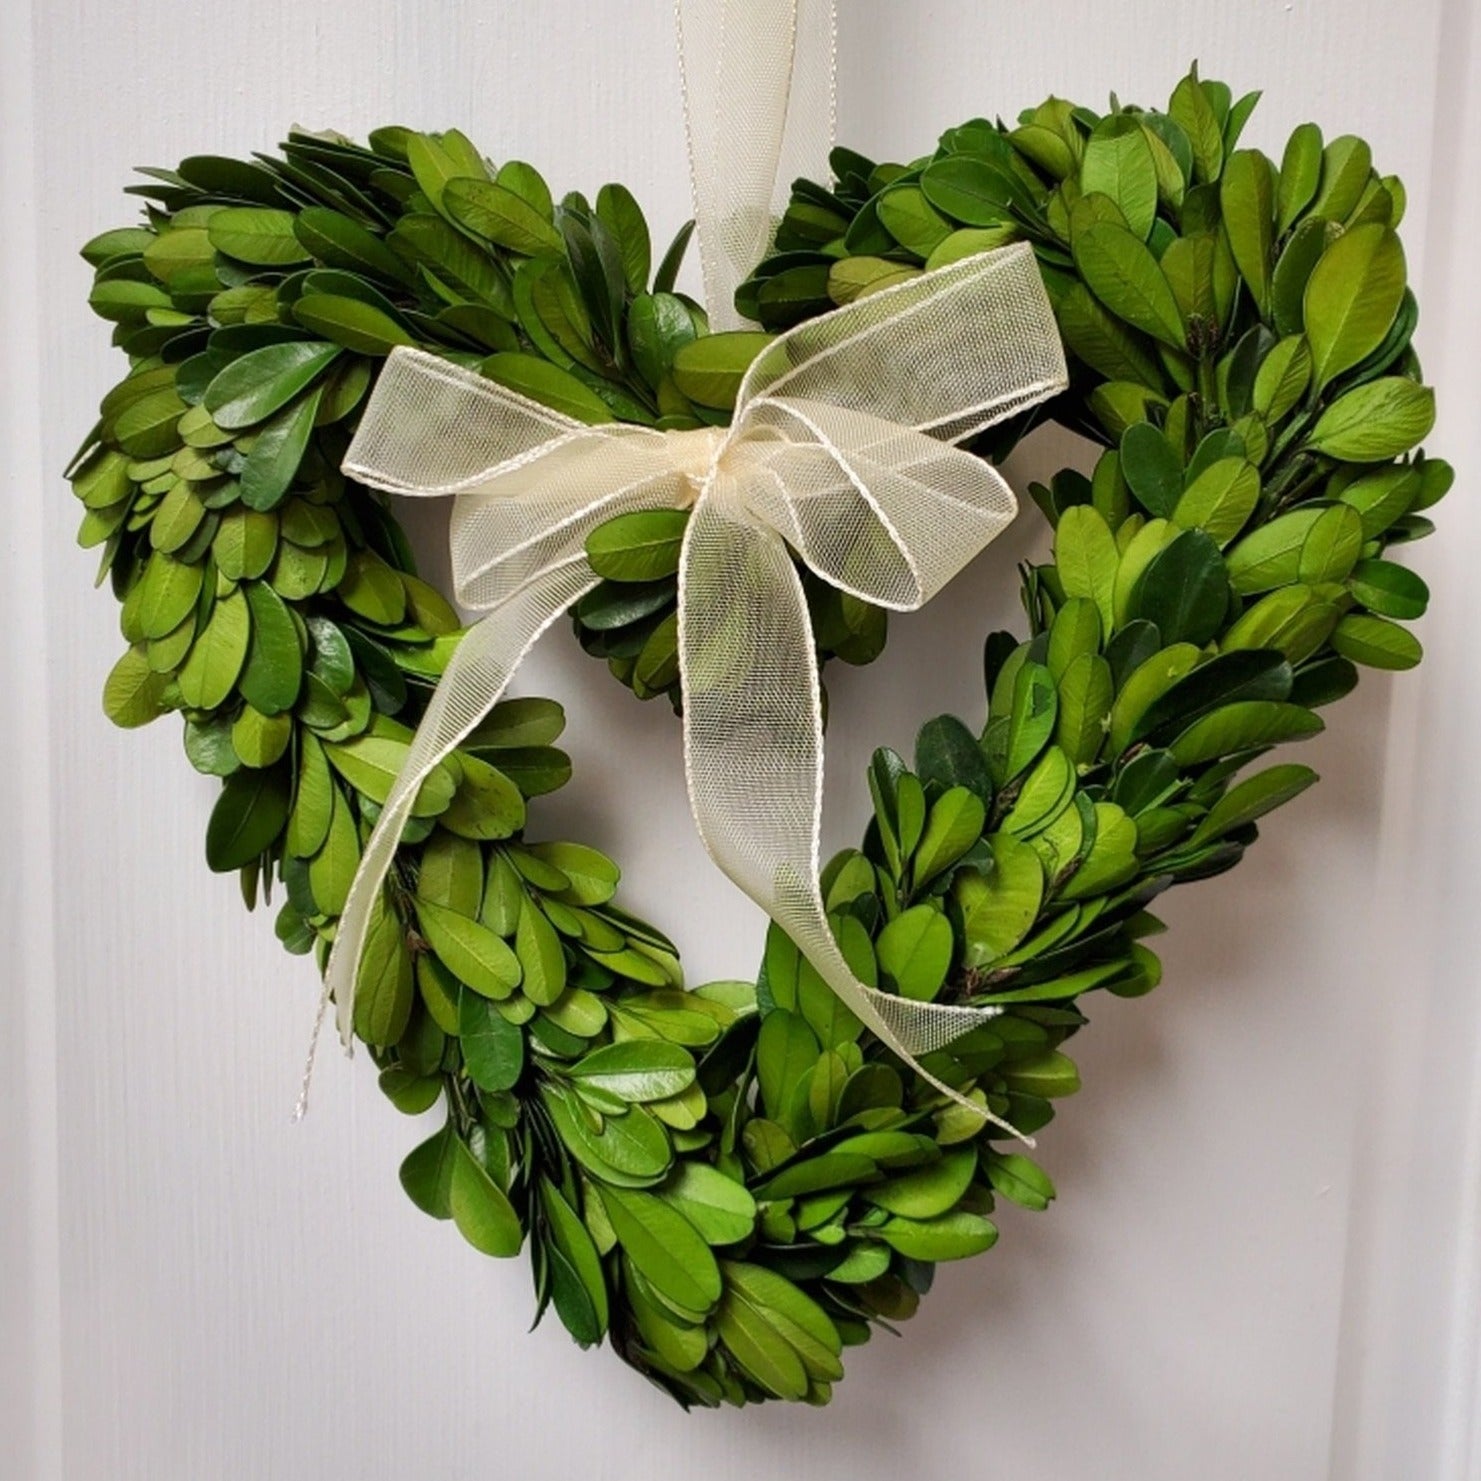 Small Boxwood Wreaths - 6, 8, and 10”